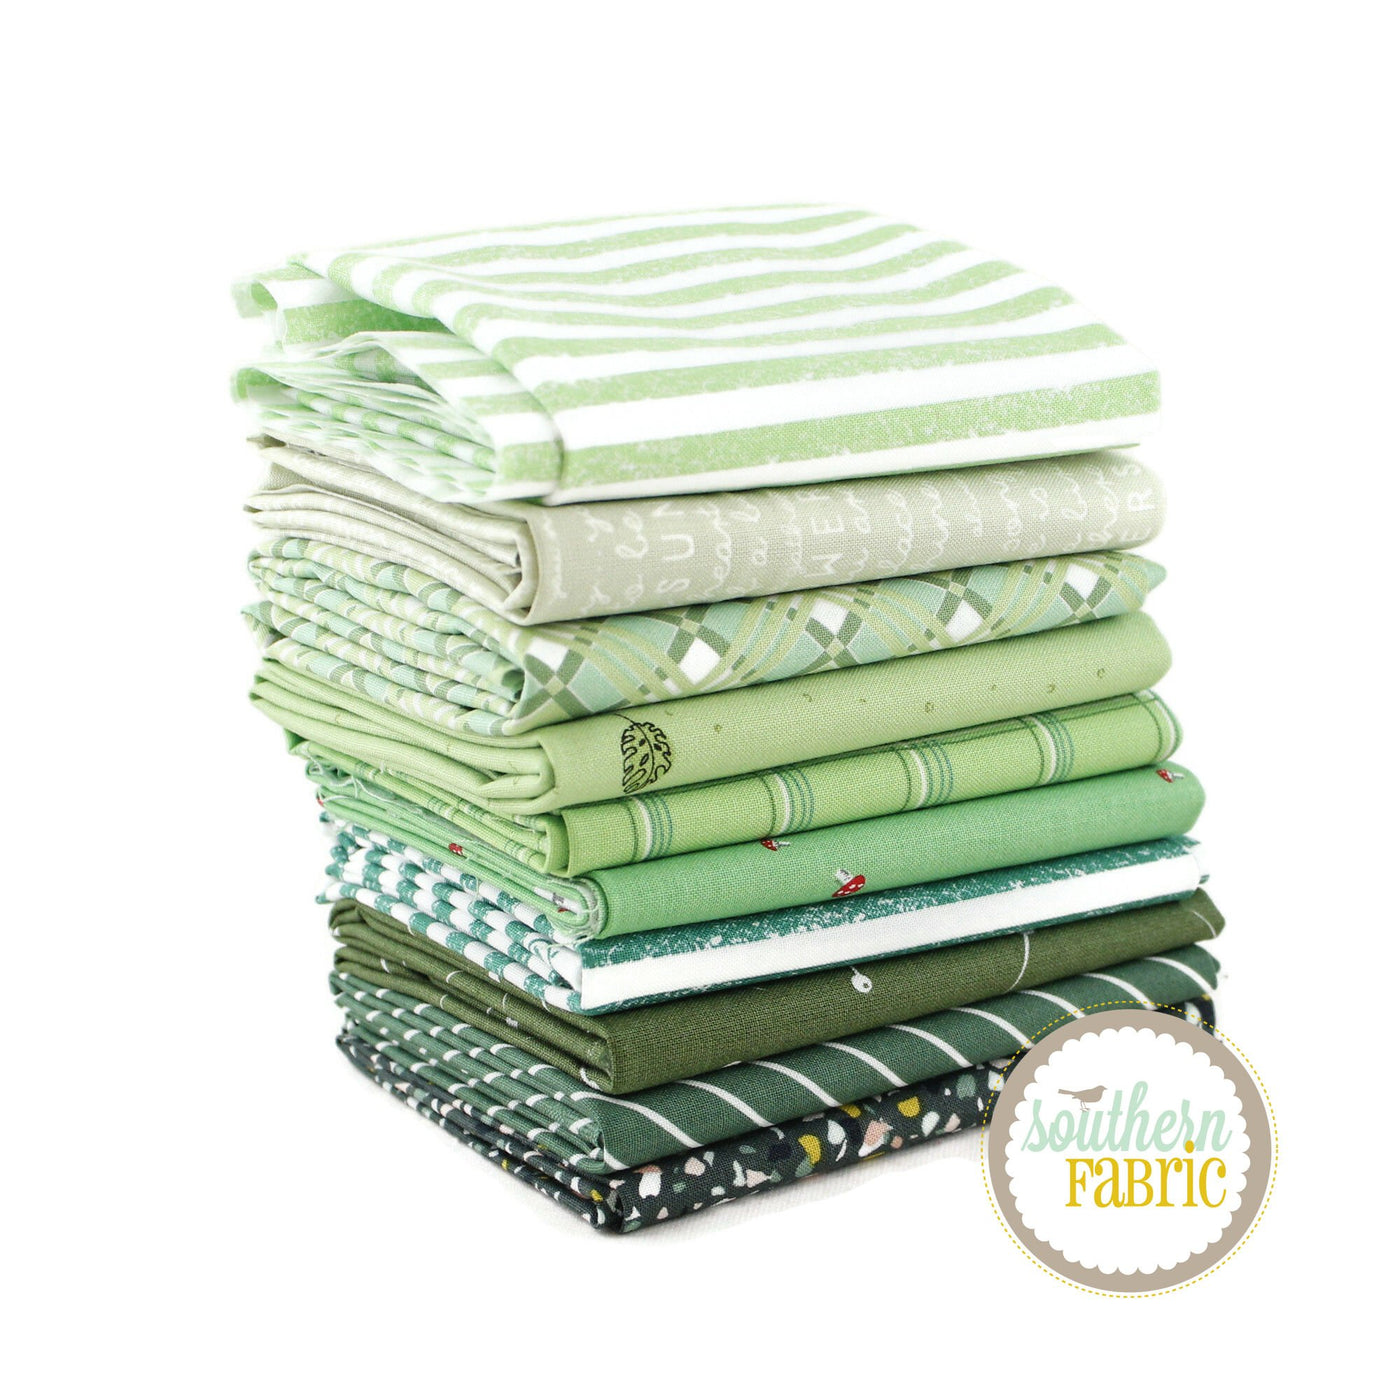 Green Fat Quarter Bundle (10 pcs) by Mixed Designers for Southern Fabric